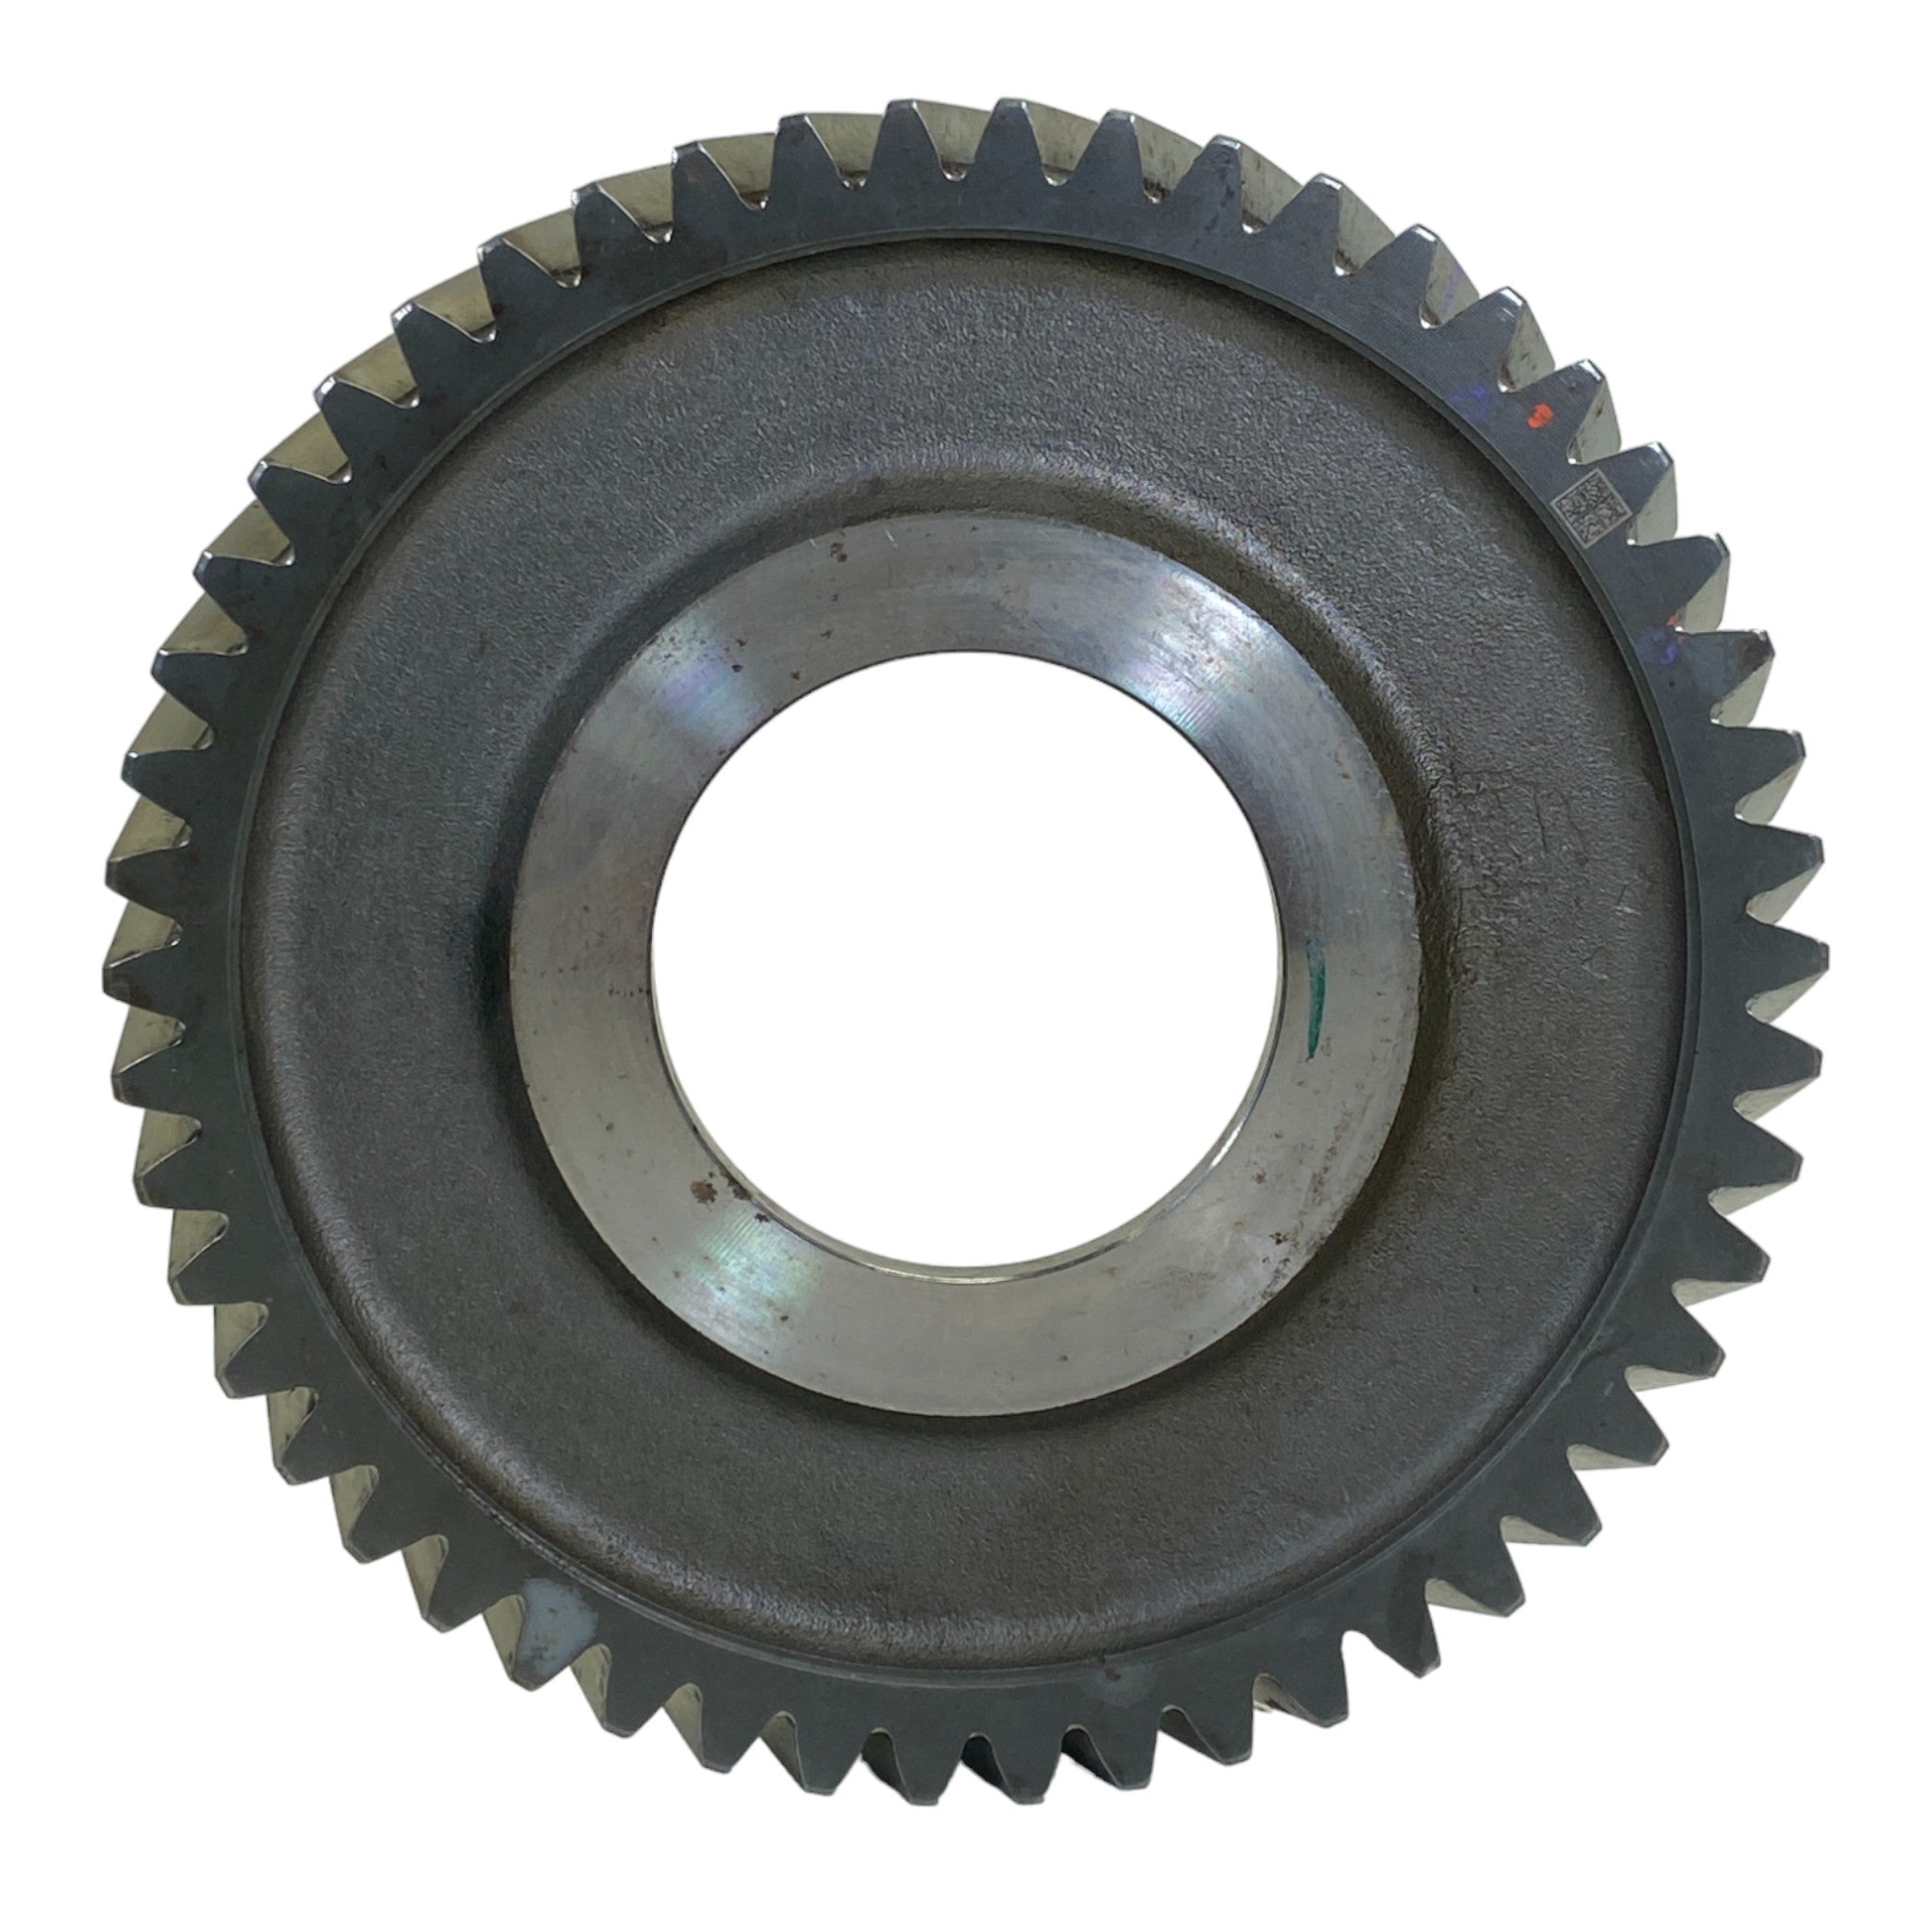 E87-6004 10000699 Genuine Paccar Fuller Mainshaft Gear 2Nd For Paccar